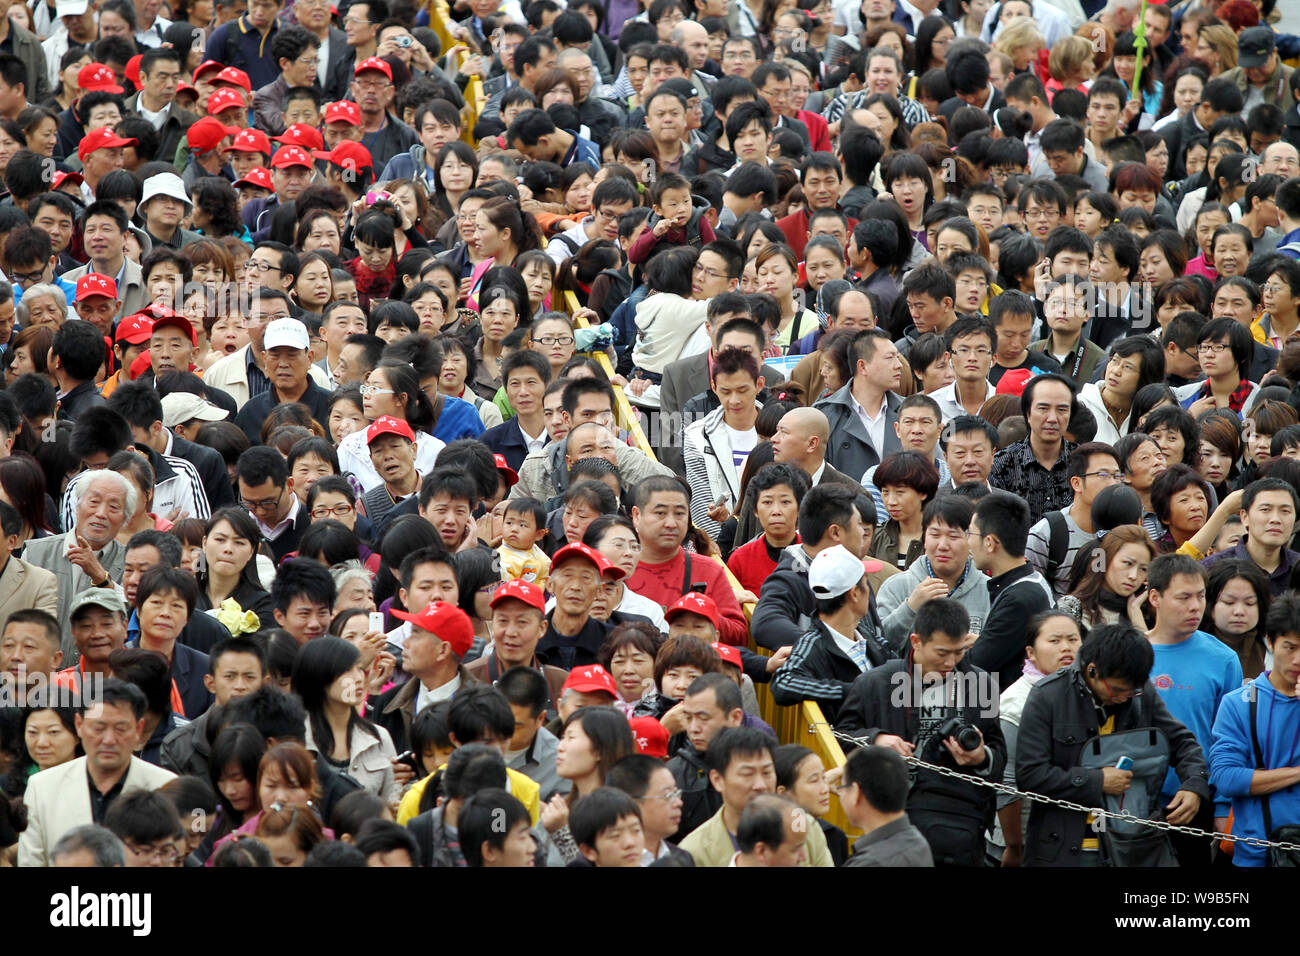 Crowds of visitors queue up to enter the World Expo Park in Shanghai, China, 24 October 2010.   More than 70 million people have visited the 2010 Worl Stock Photo